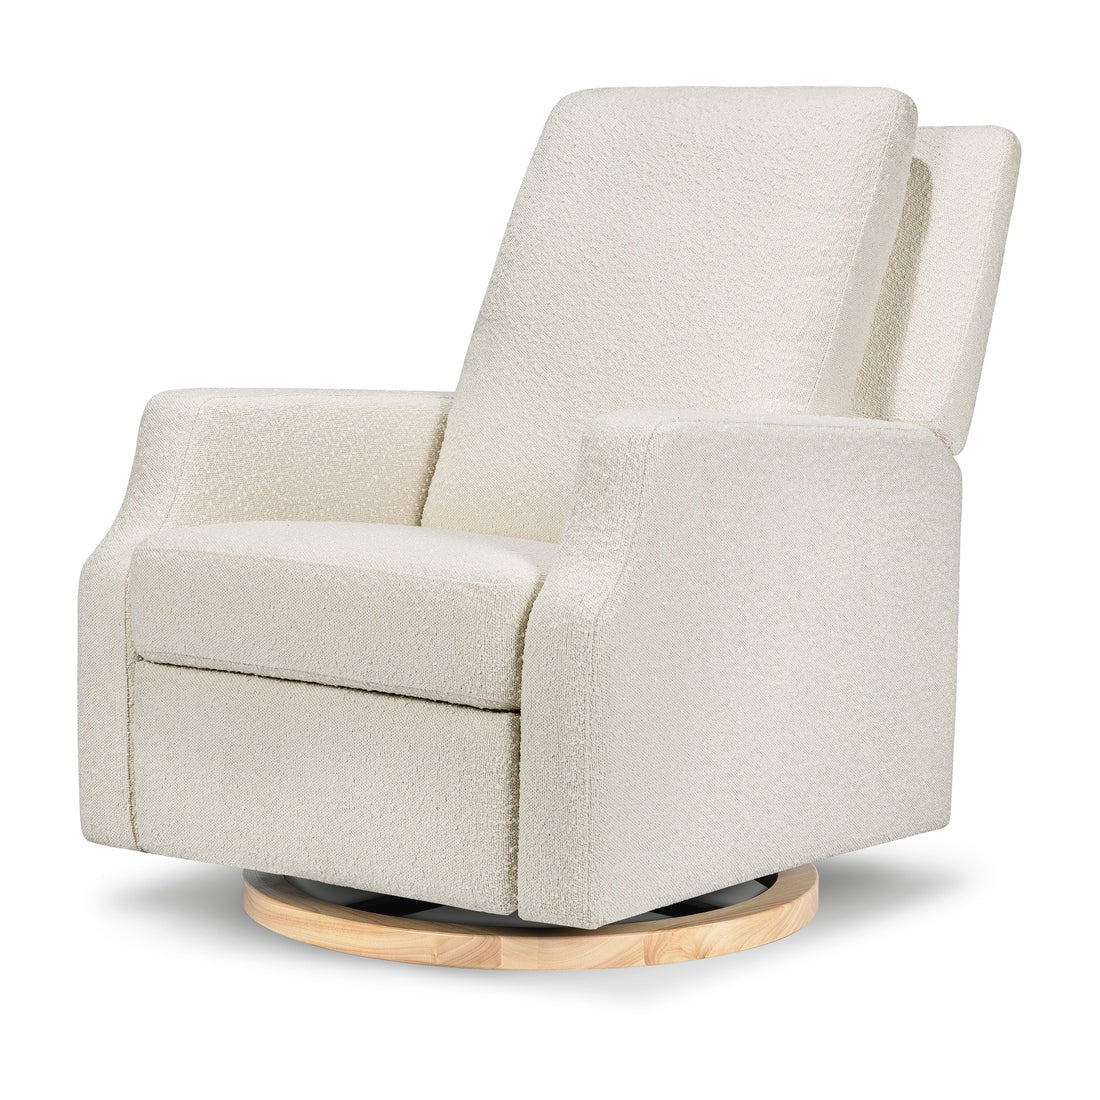 Namesake Crewe Recliner and Swivel Glider - Ivory Boucle with Light Wood Base